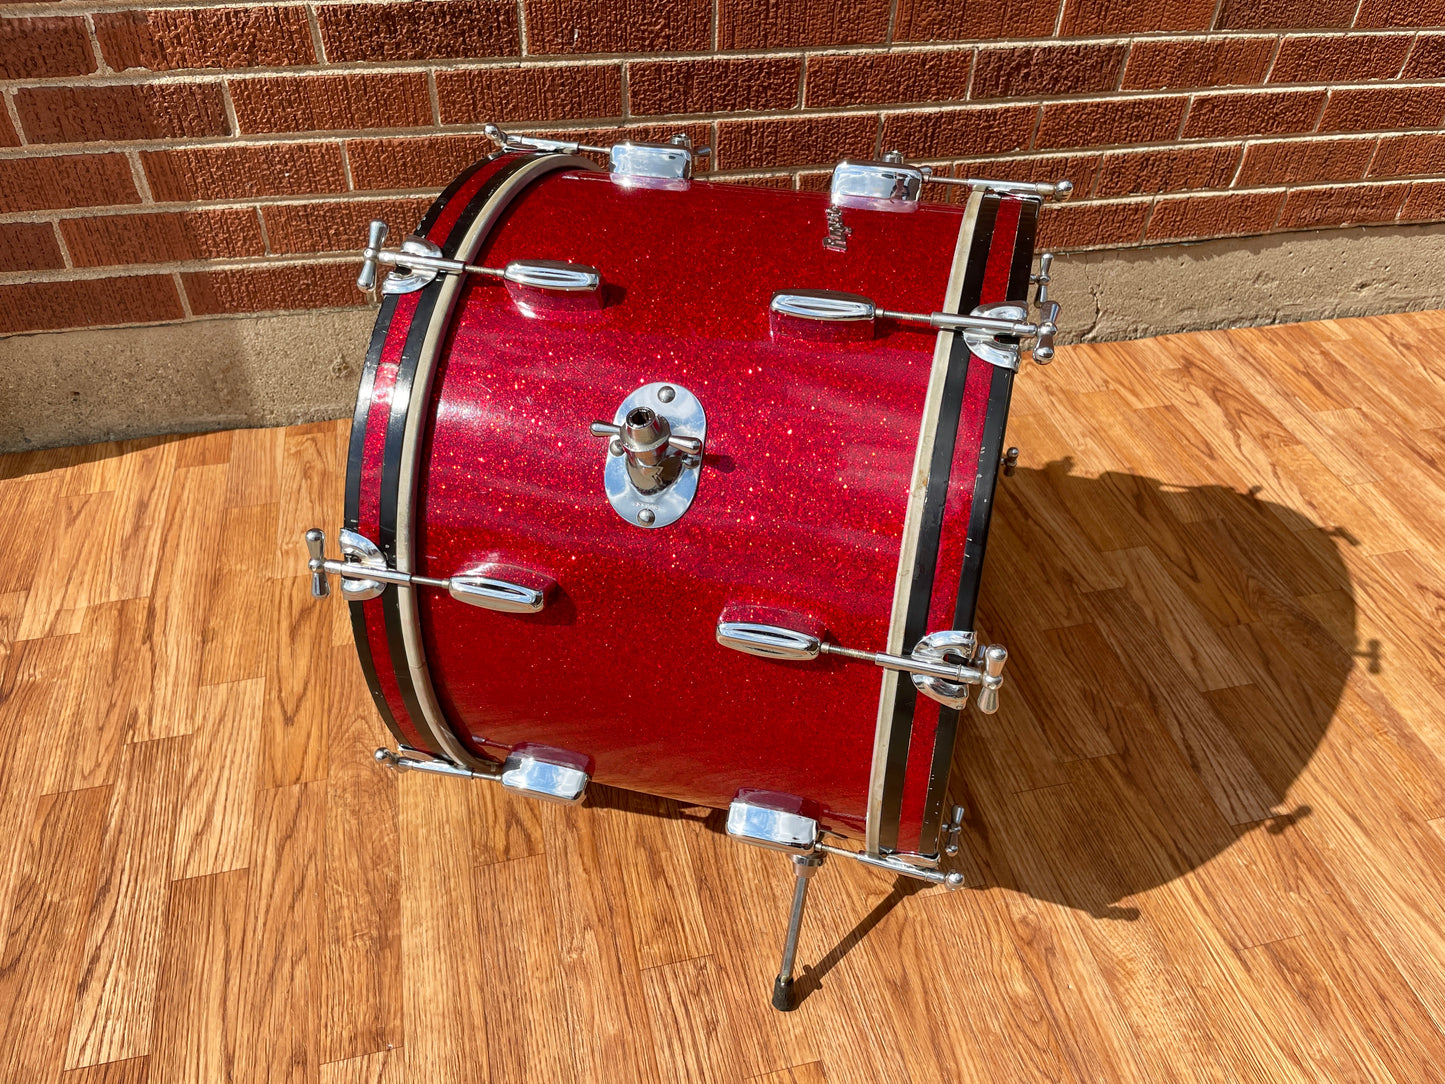 1960s Rogers 14x20 Holiday Bass Drum Single Sparkling Red Pearl Cleveland Glass Glitter Sparkle